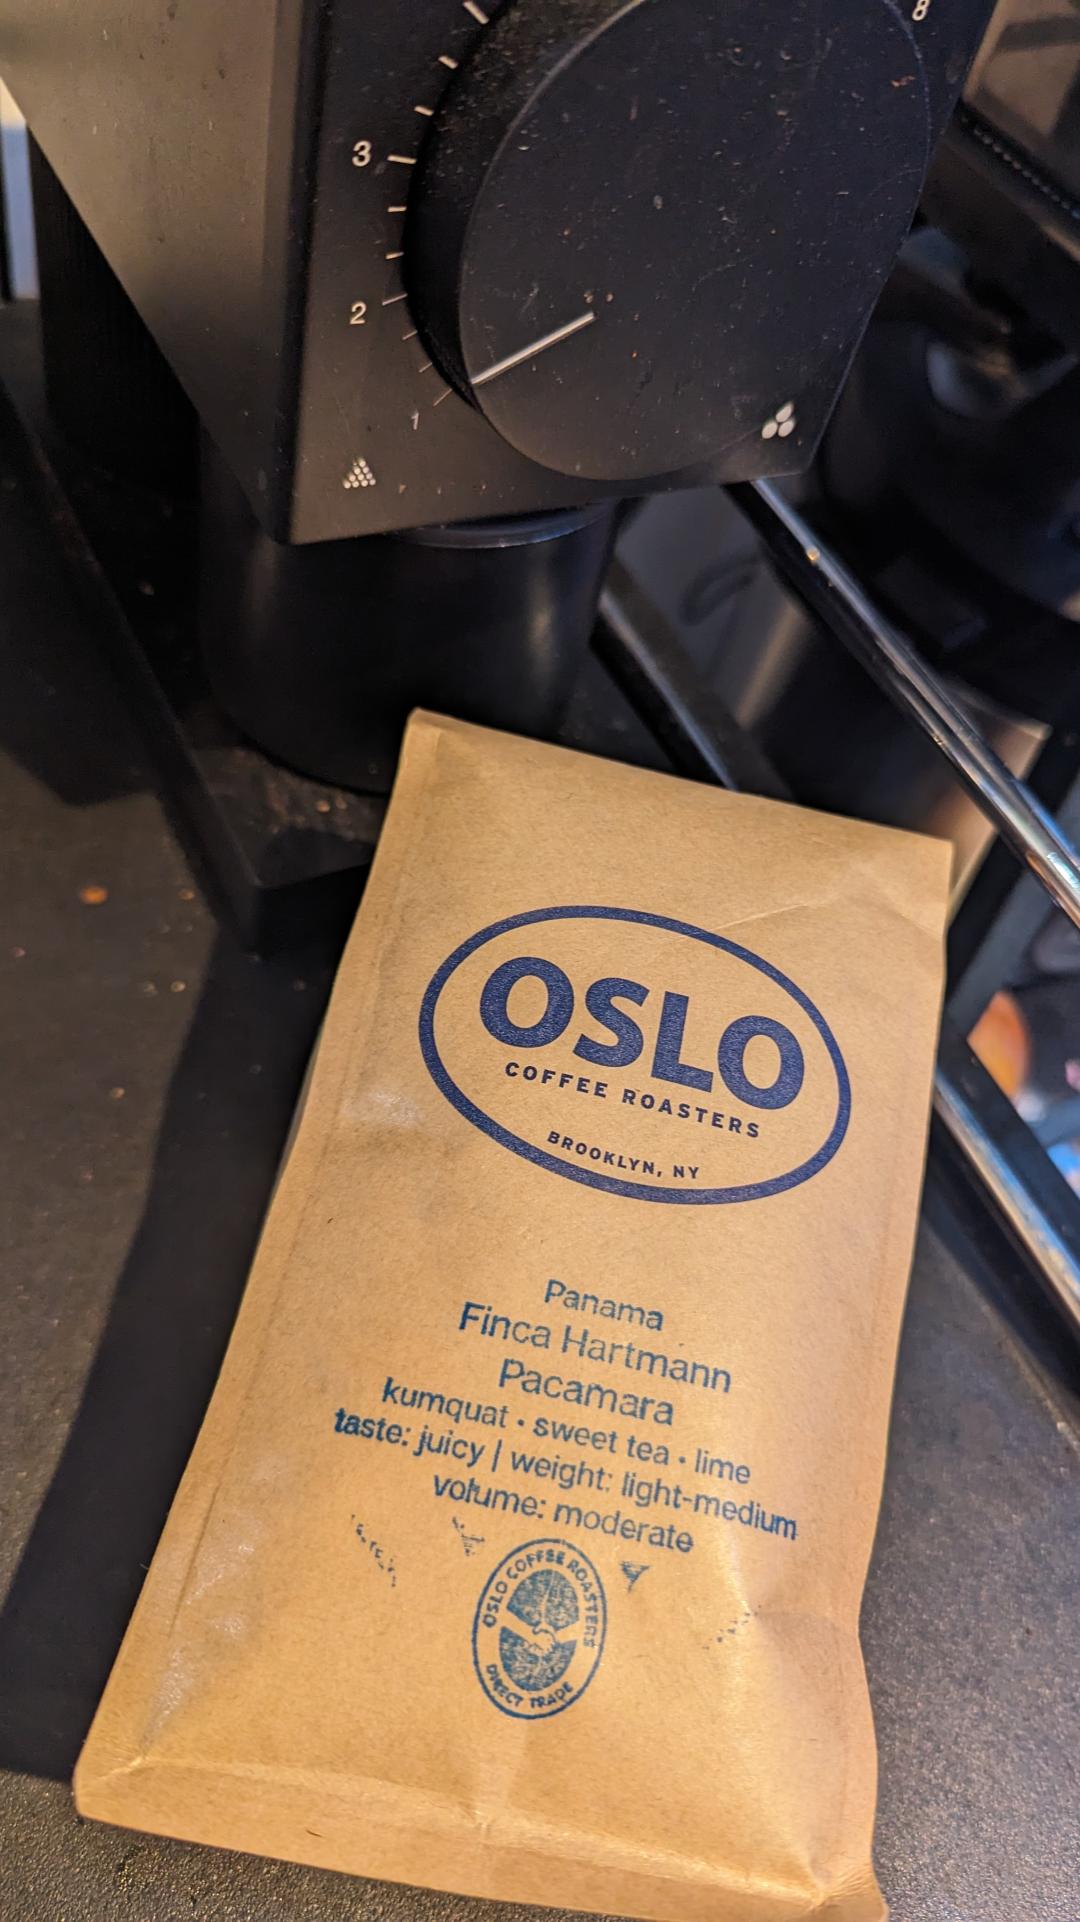 A bag of Oslo Coffee Roaster beans. A brown bag with the Oslo logo and bean type stamps in blue ink.